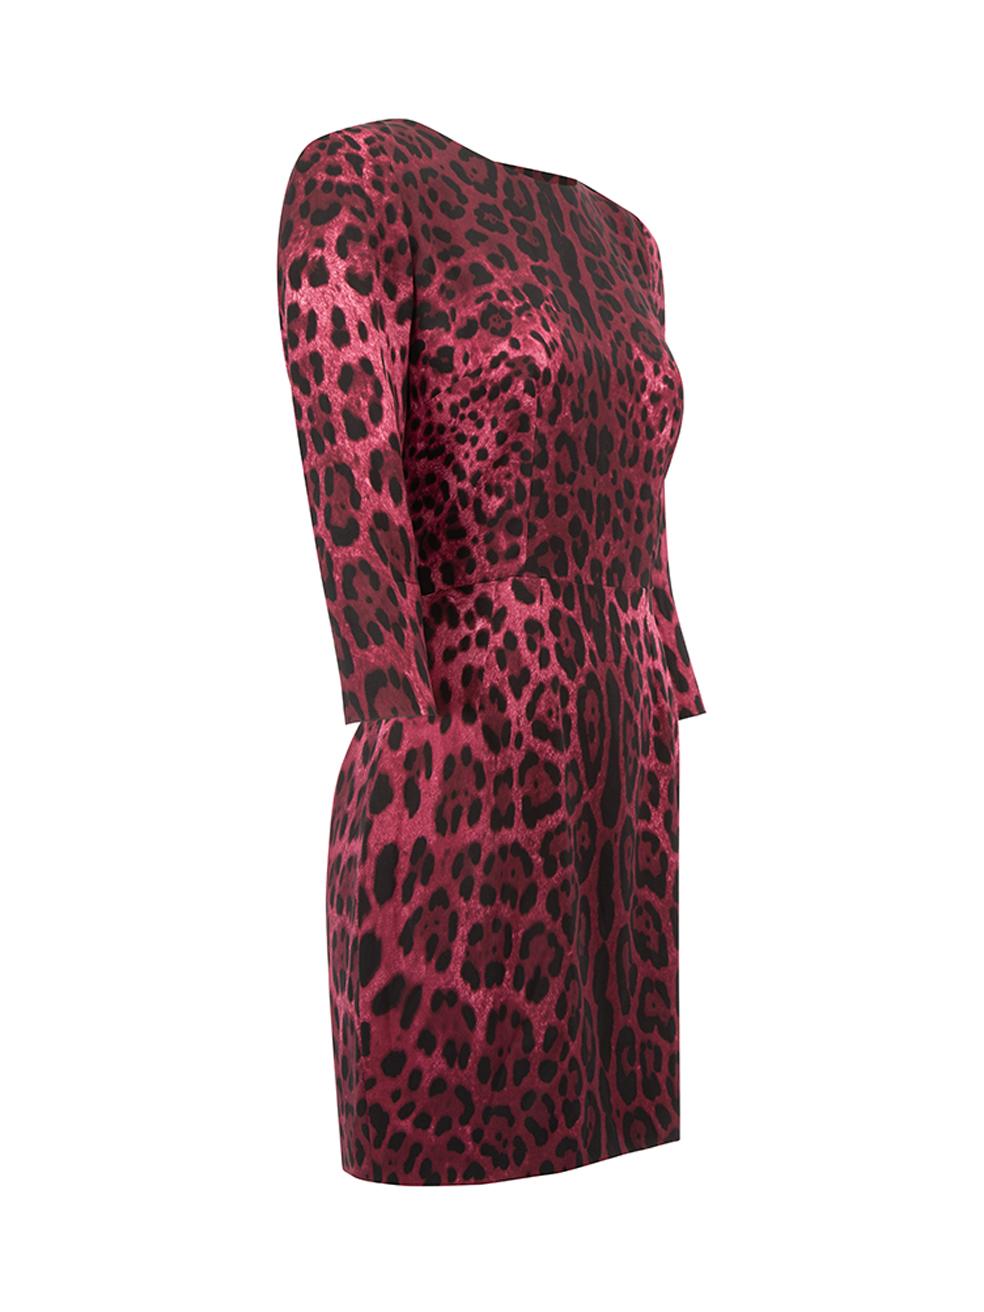 CONDITION is Very good. Hardly any visible wear to dress is evident. There is a sticky stubstance near the neckline on this used Dolce & Gabbana designer resale item.   Details  Purple Silk Mini dress Leopard pattern Round neckline 3/4 sleeves Back